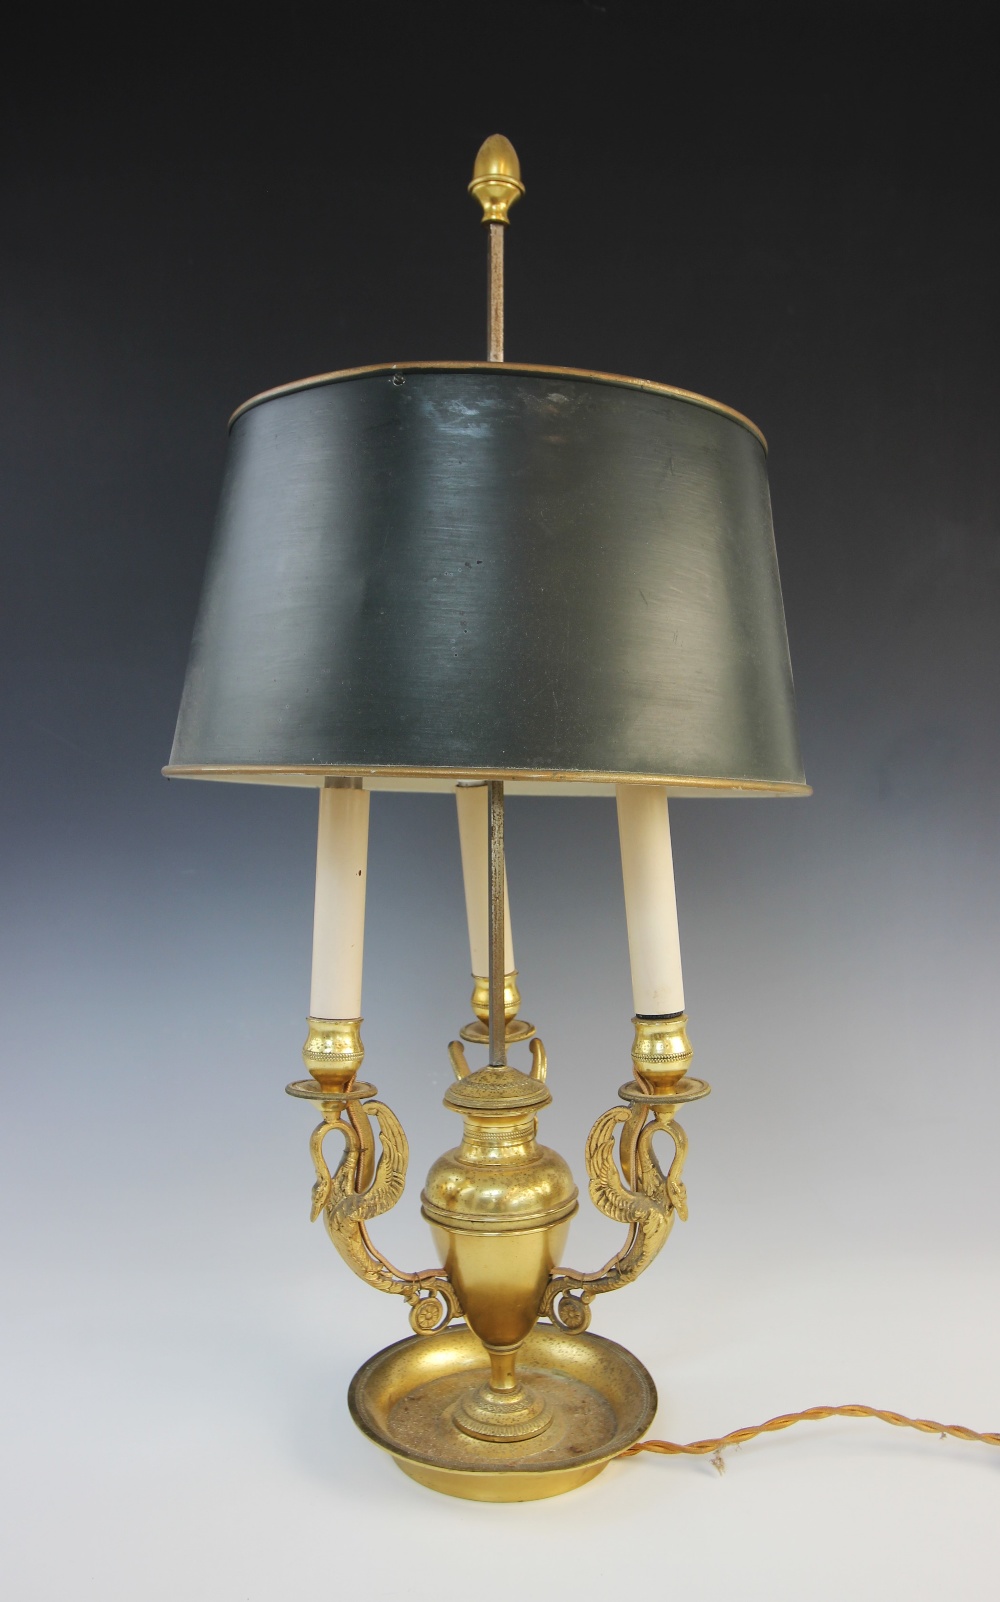 A Regency style ormolu student's lamp, modelled as a central vase issuing three swan form